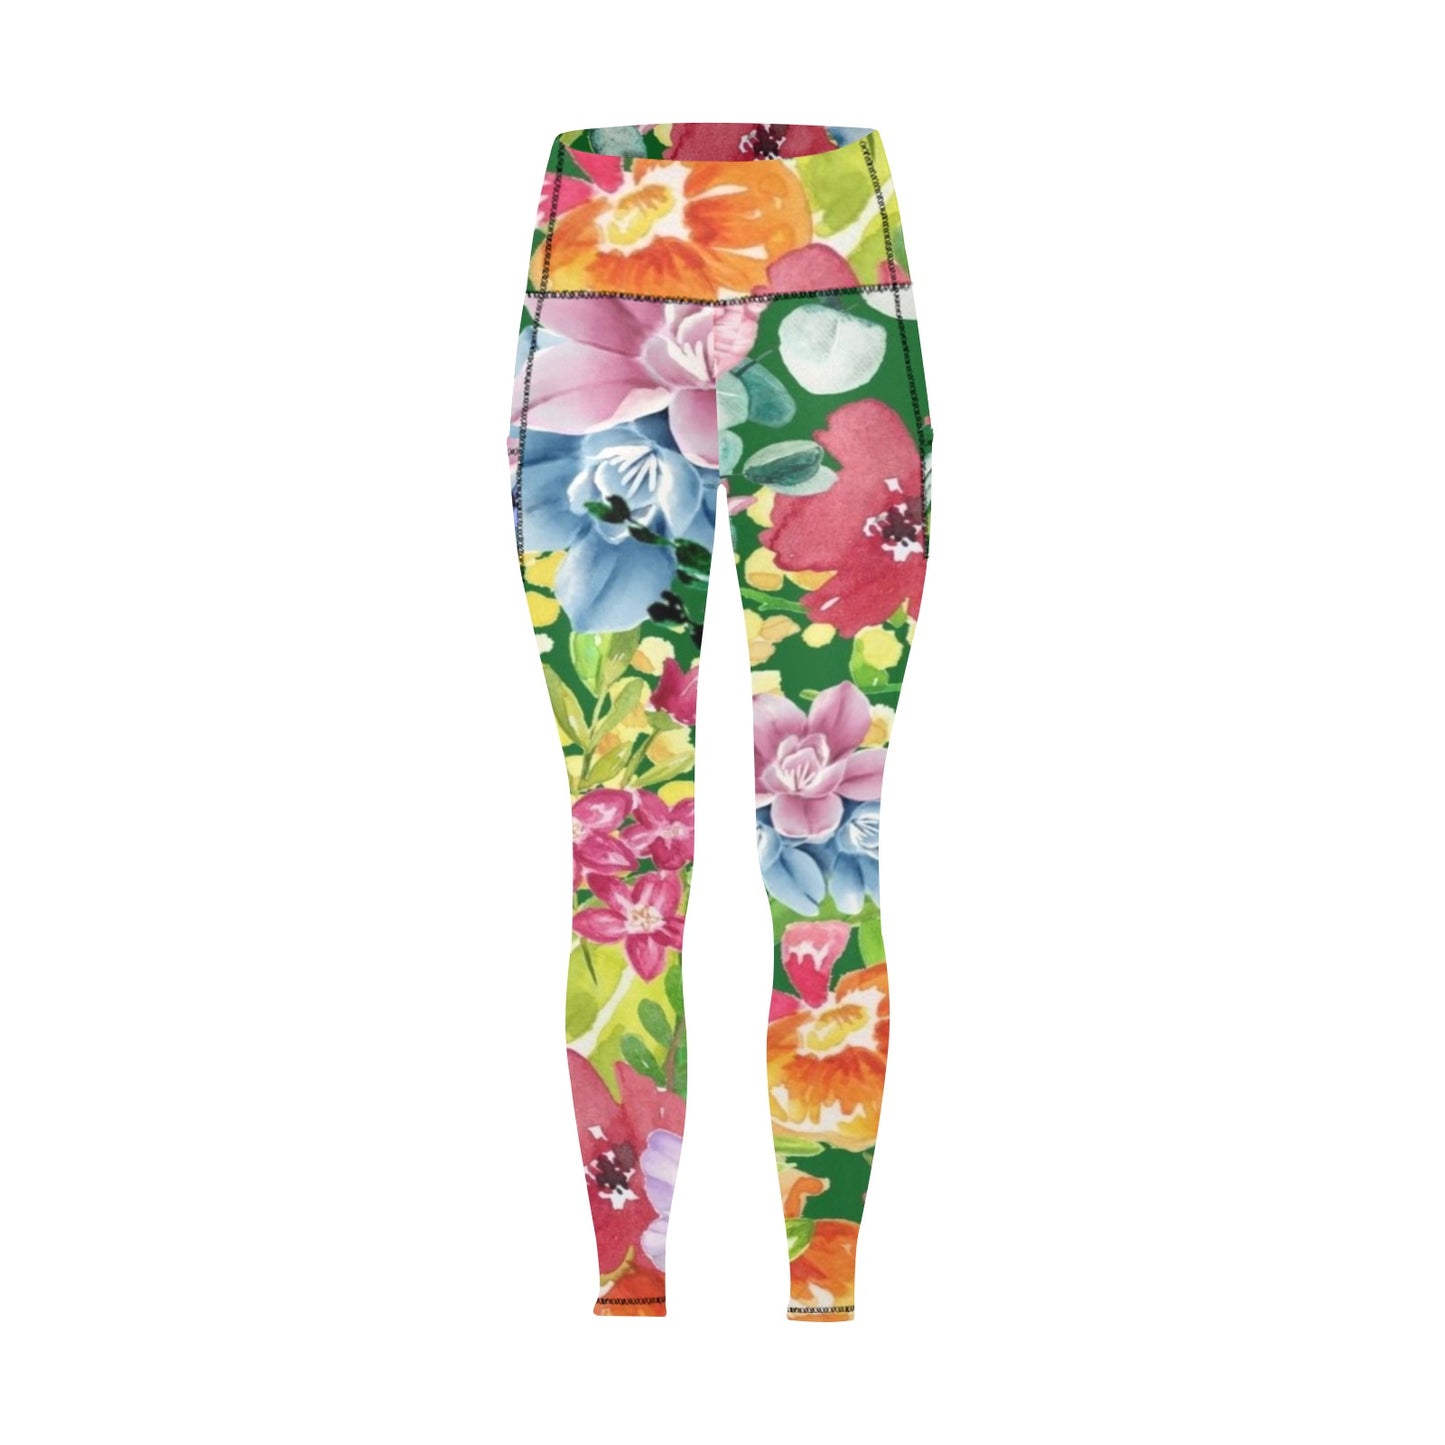 Bright Floral - Women's Leggings with Pockets Women's Leggings with Pockets S - 2XL Plants